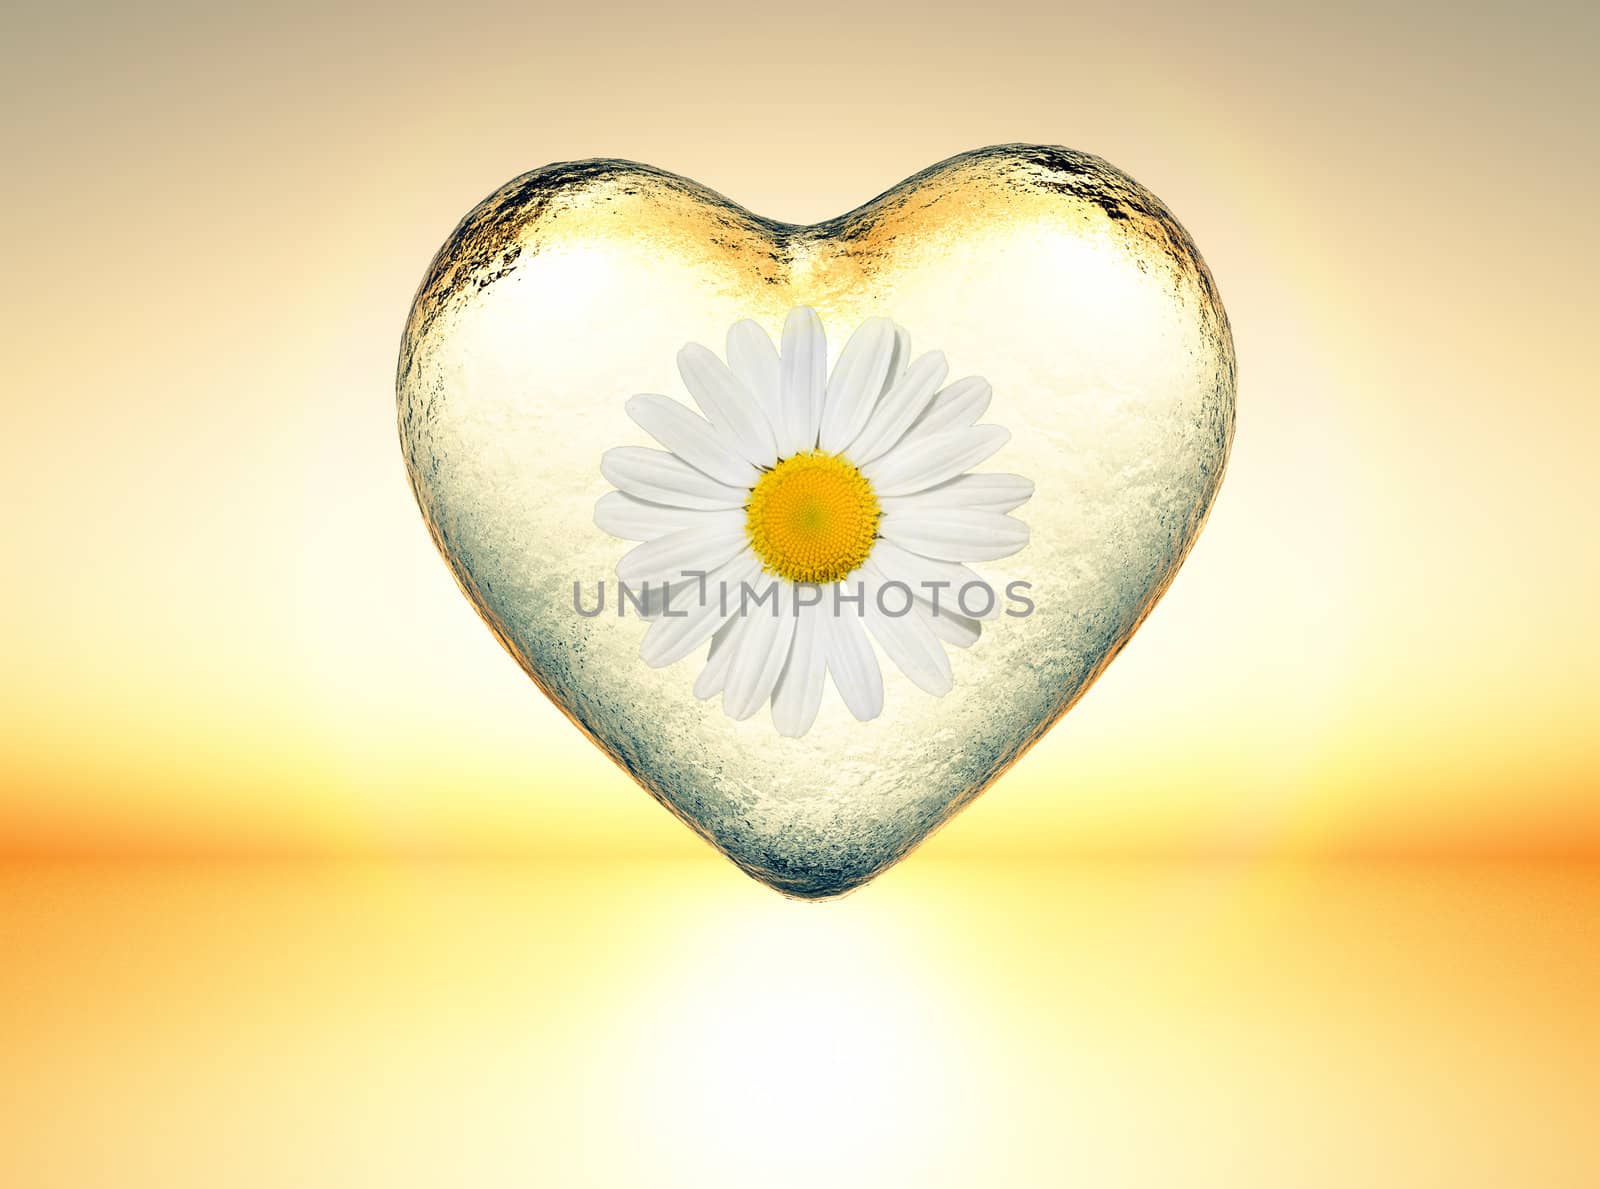 icy heart with a daisy inside